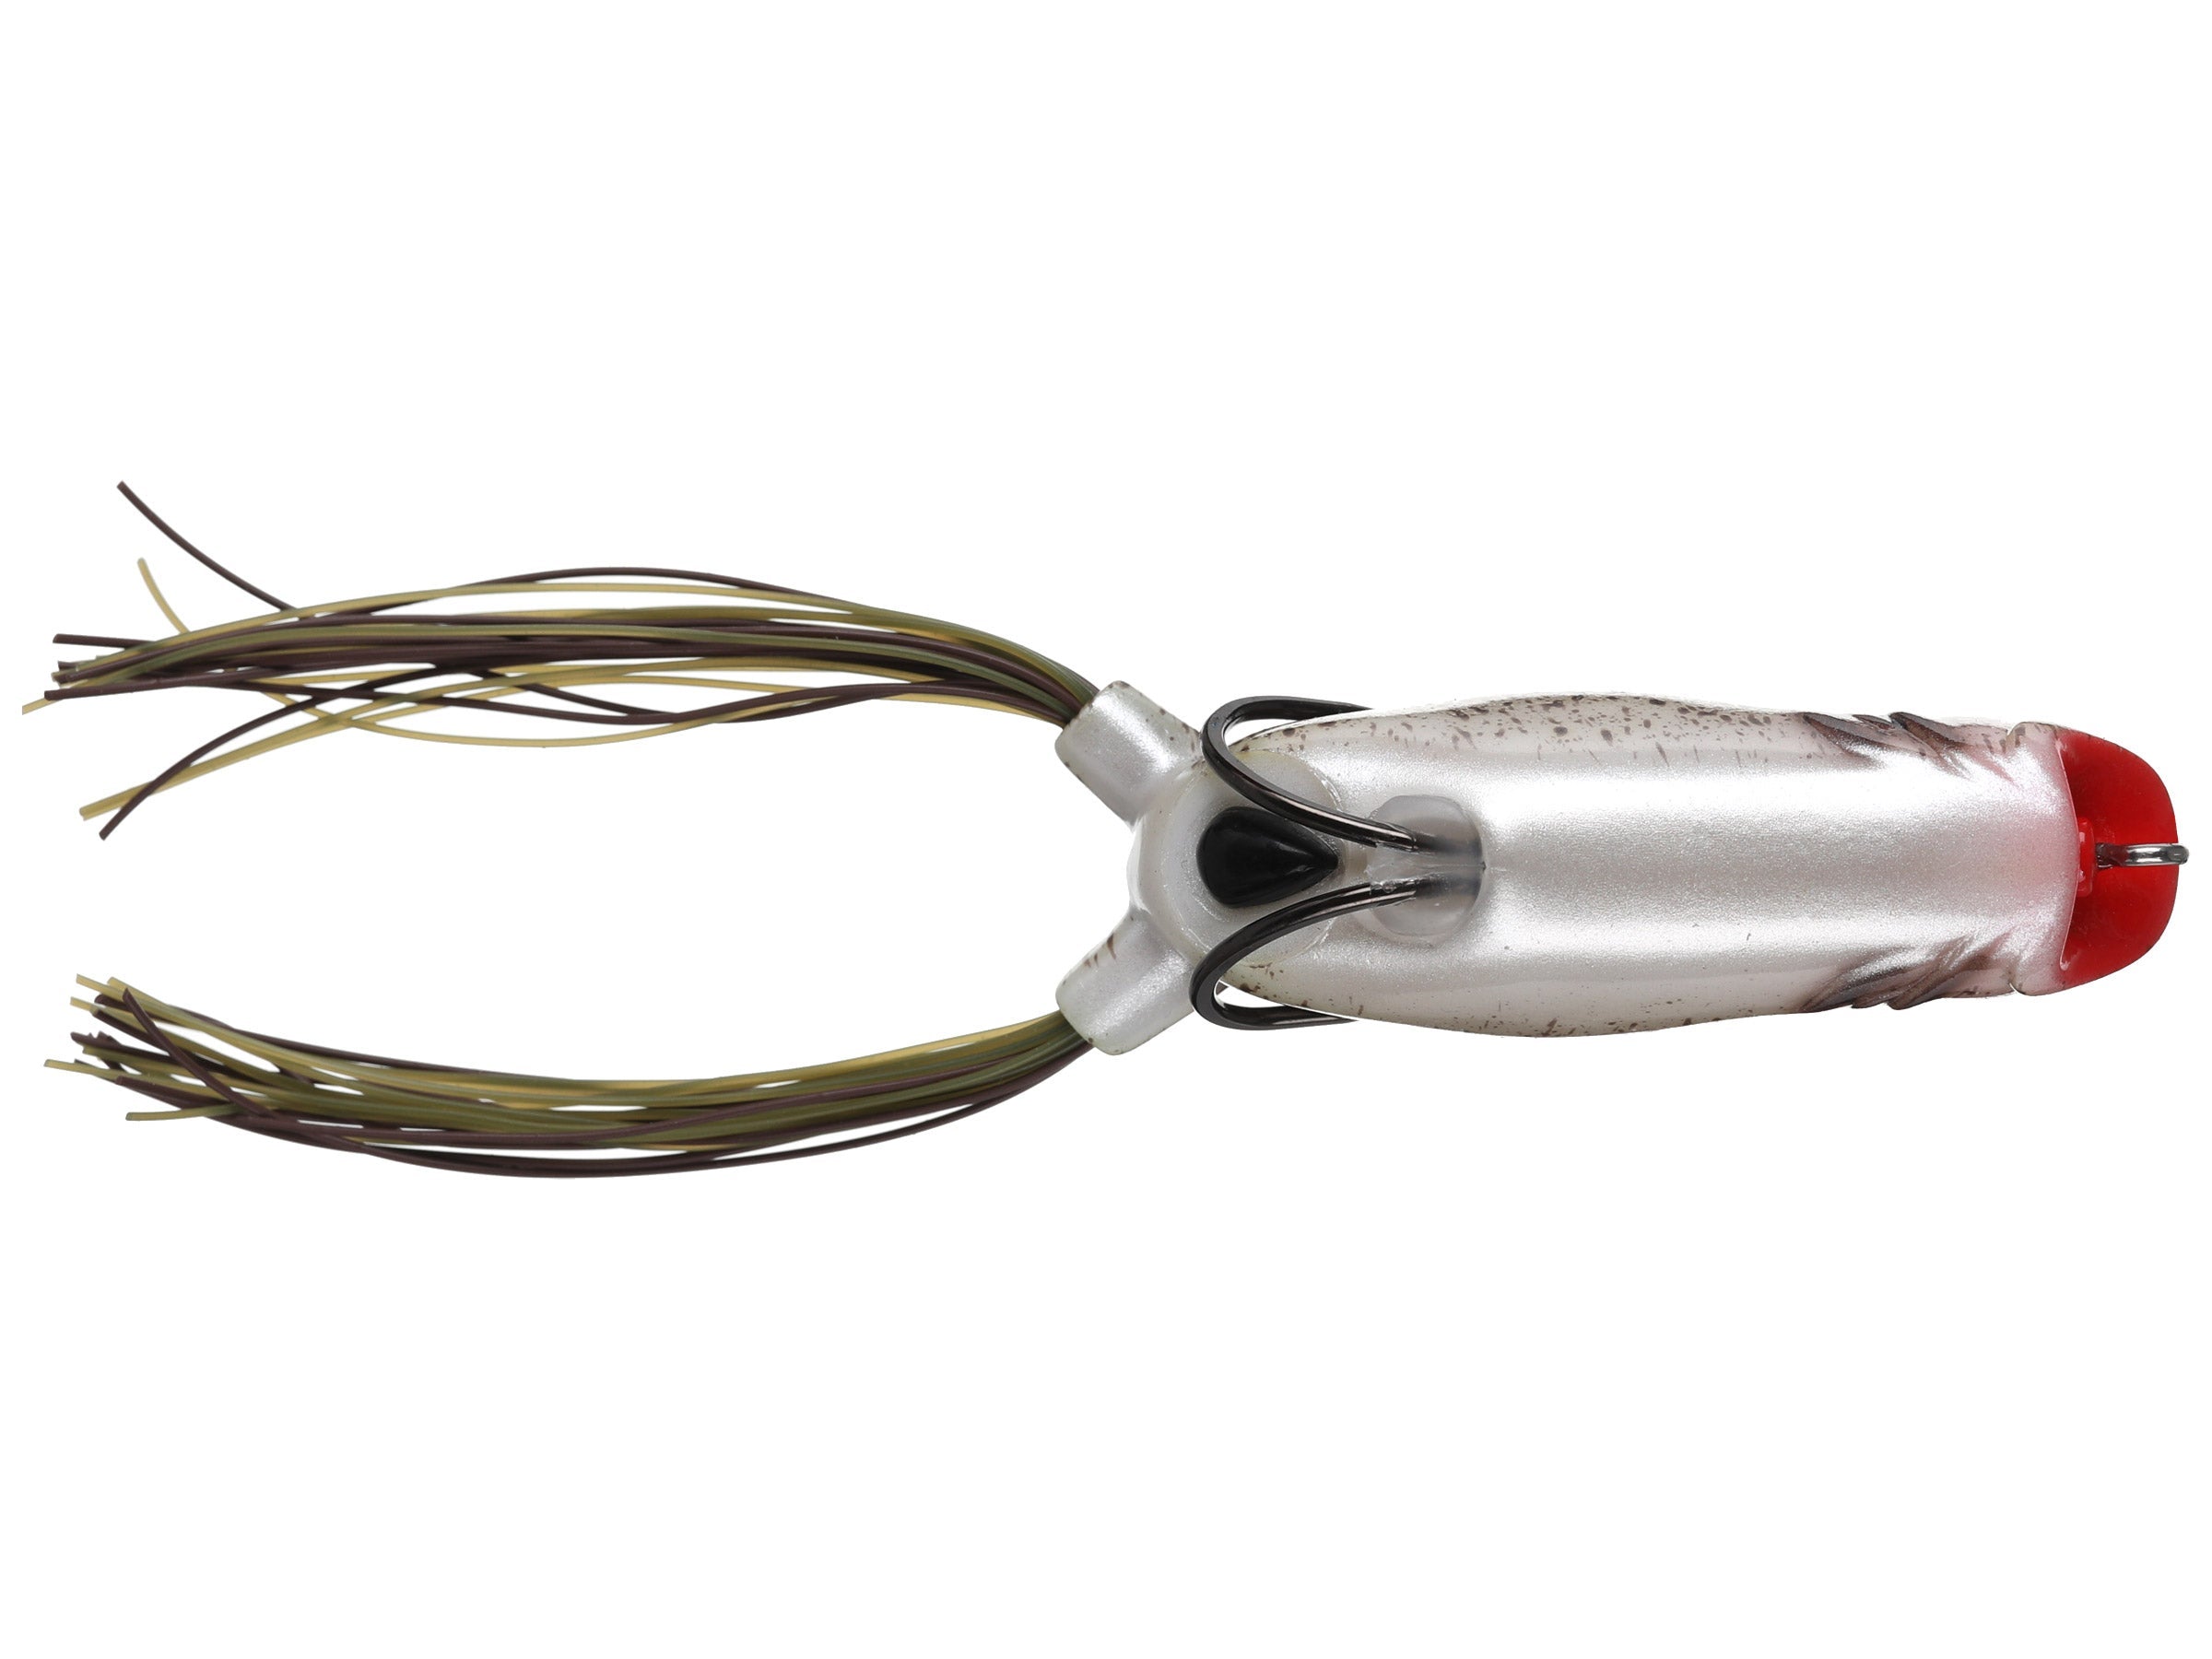 Vega Frogs are Back In Stock! After - 6th Sense Fishing